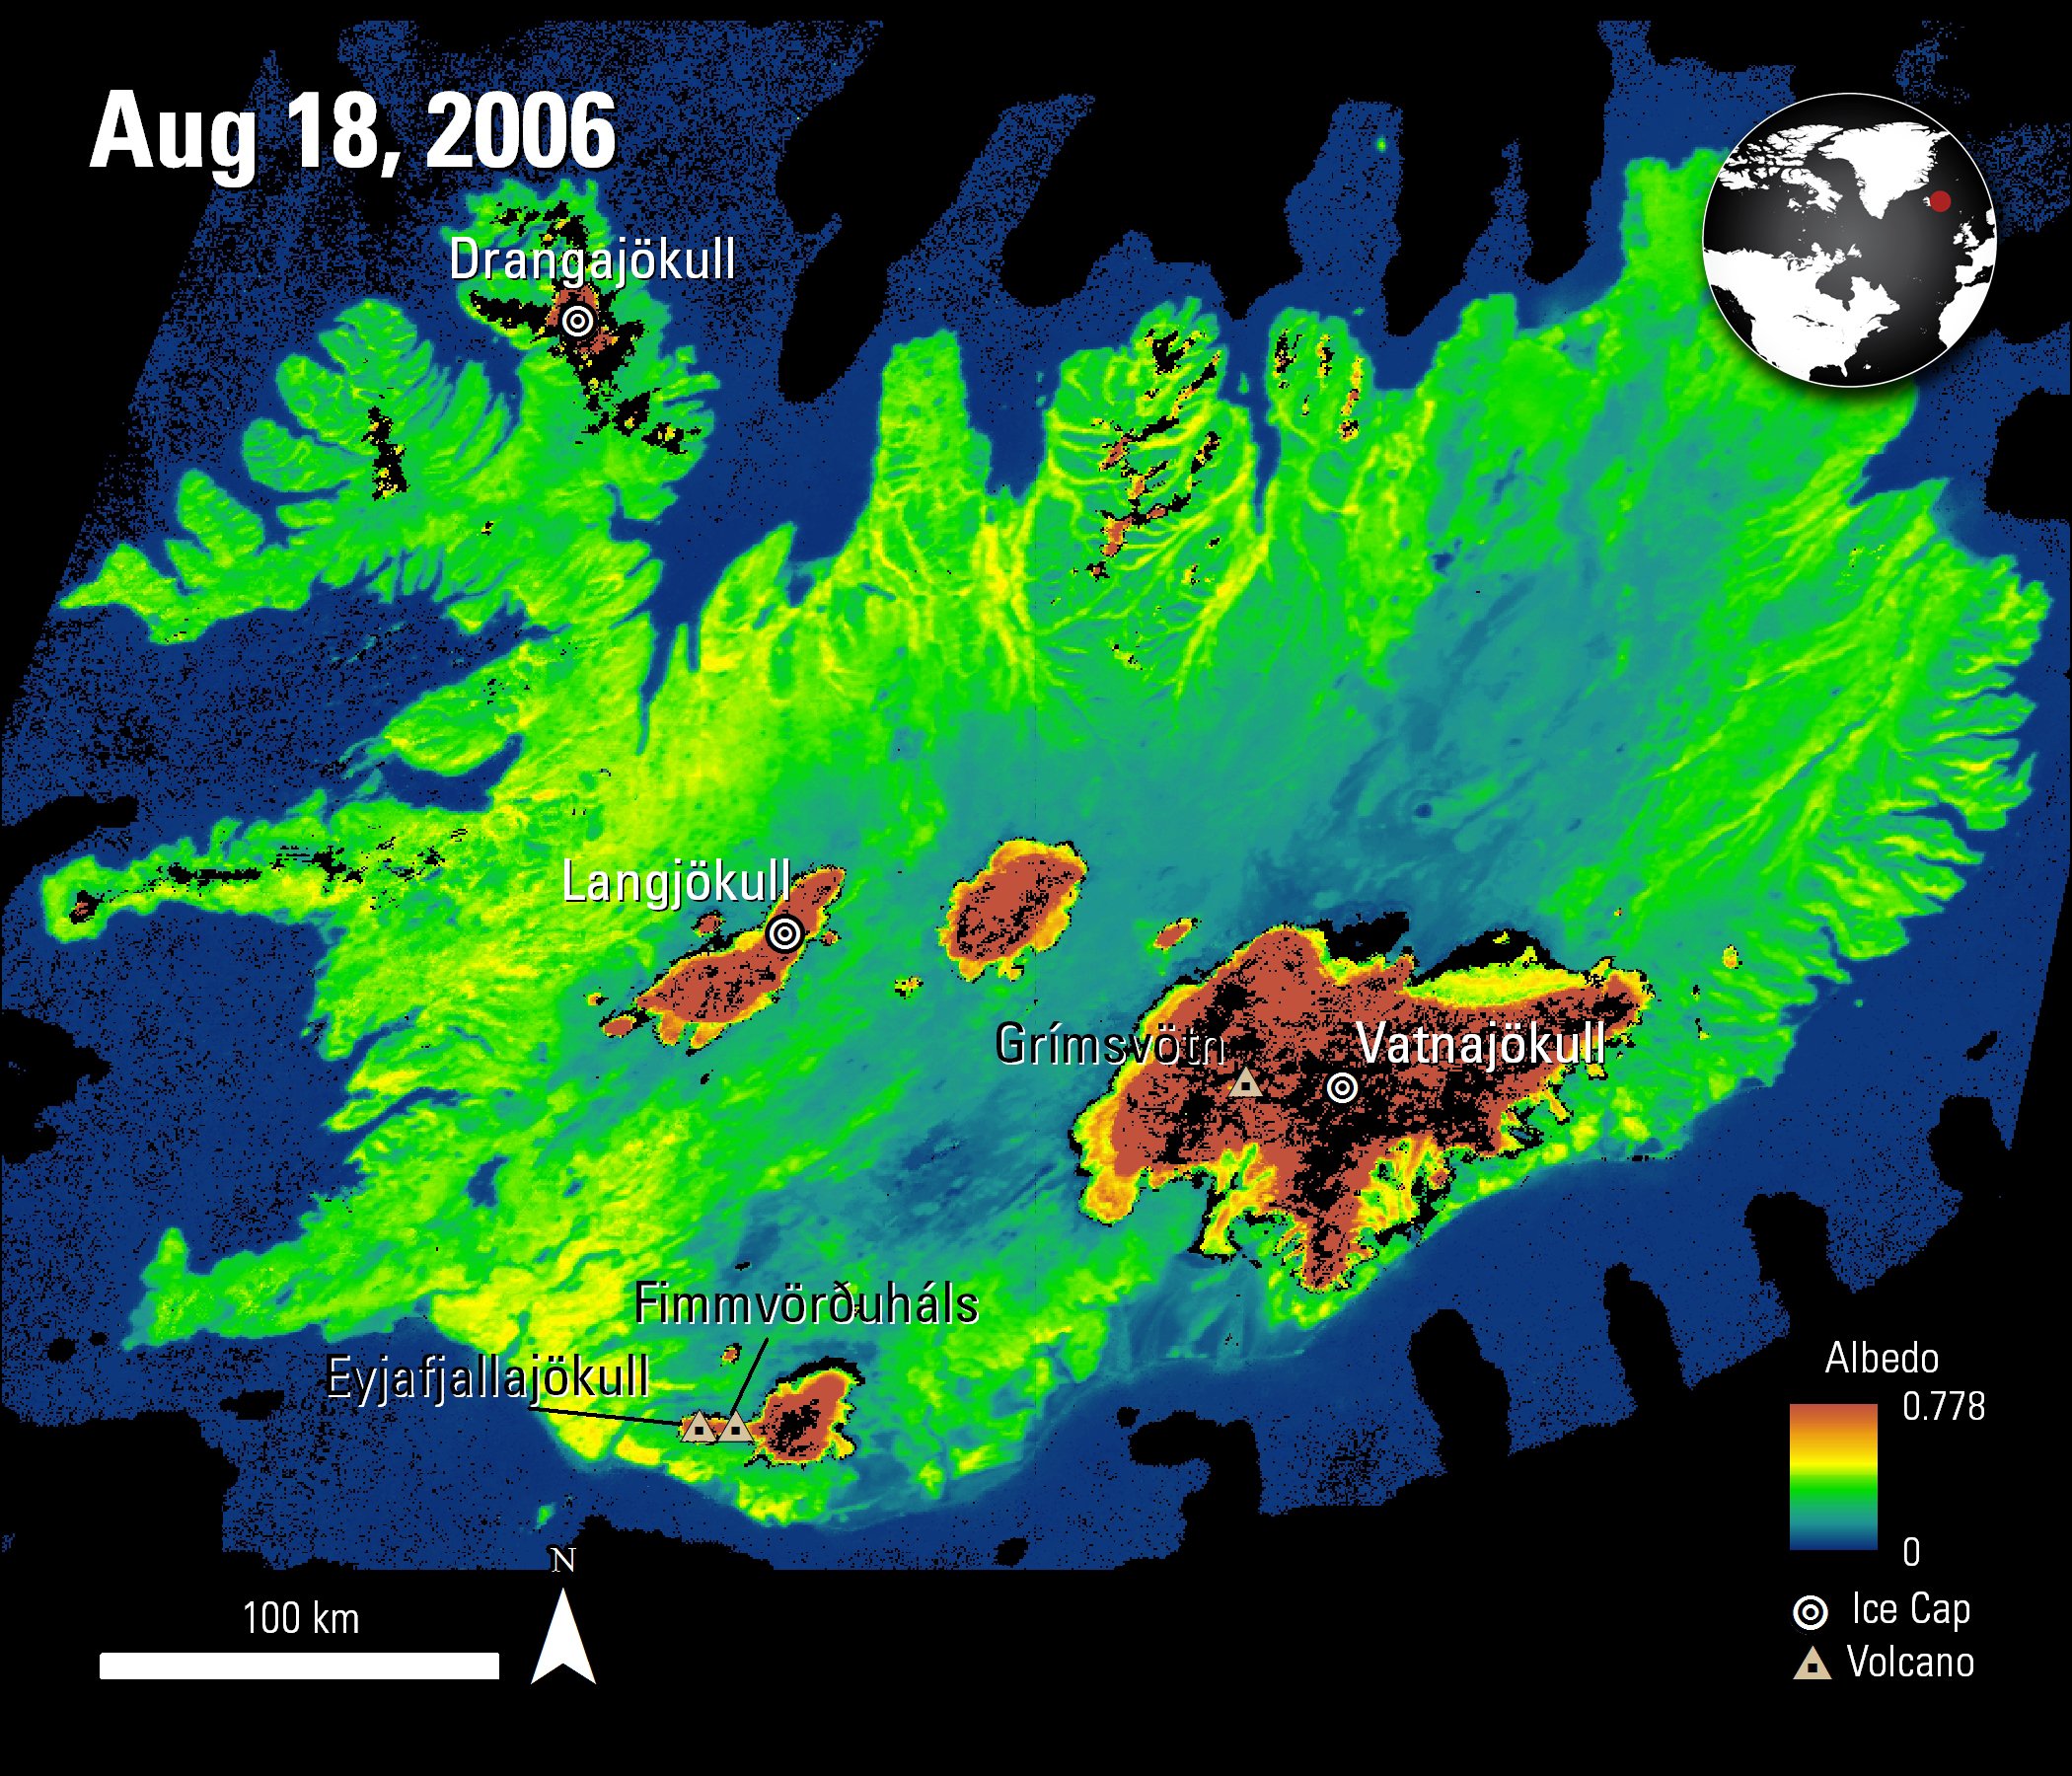 Combined MODIS Black sky albedo data over Iceland, acquired August 18, 2006.